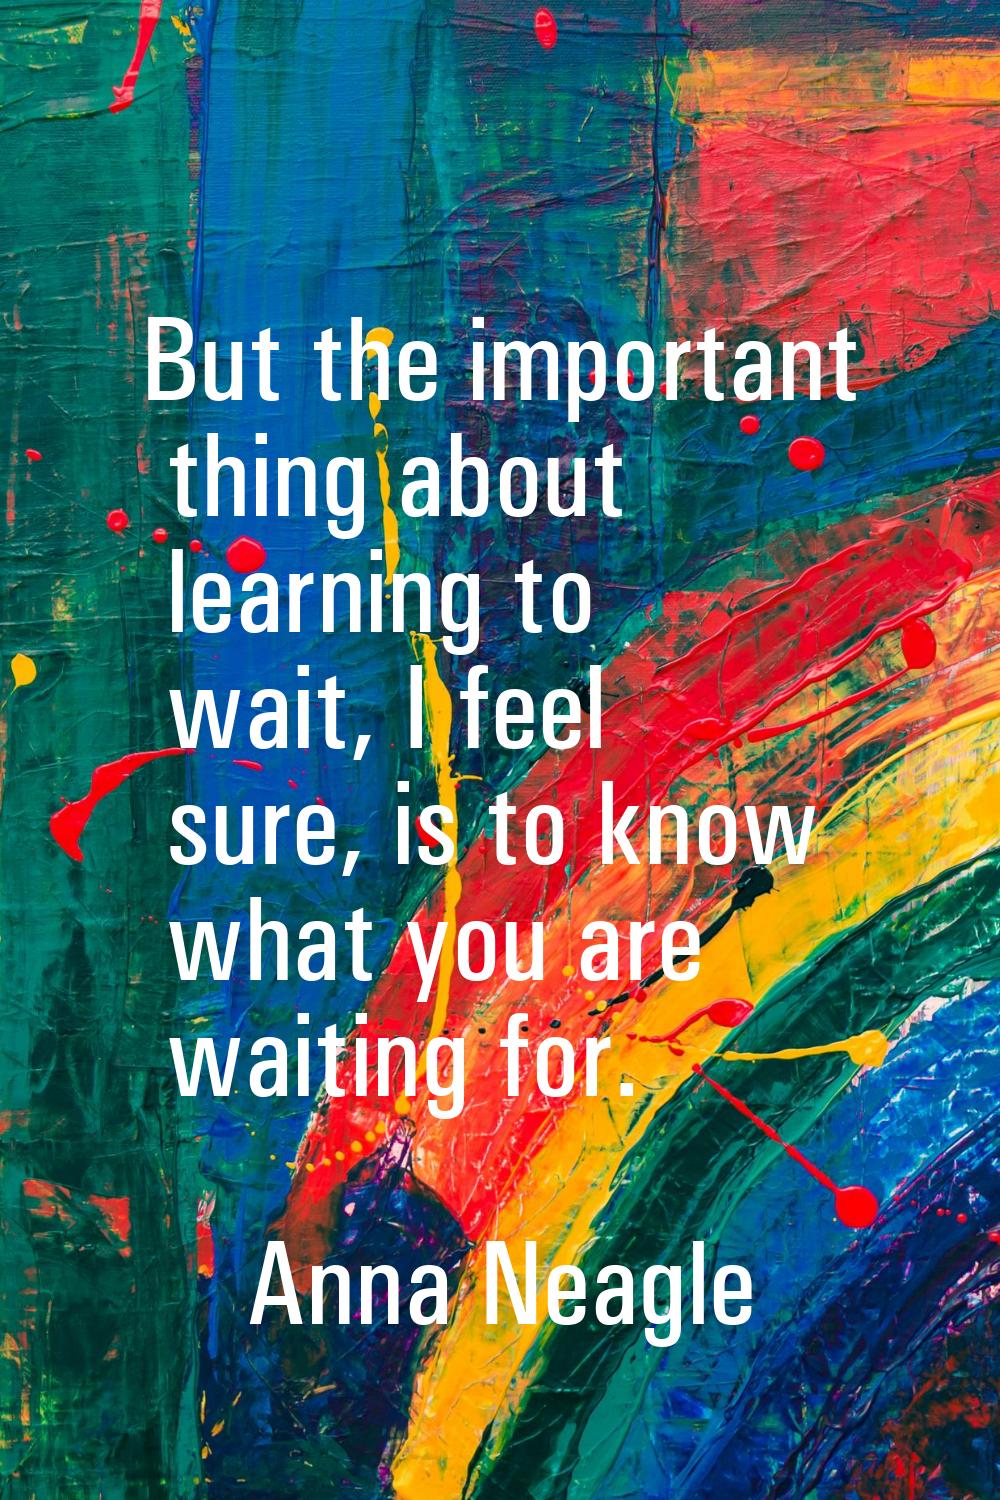 But the important thing about learning to wait, I feel sure, is to know what you are waiting for.